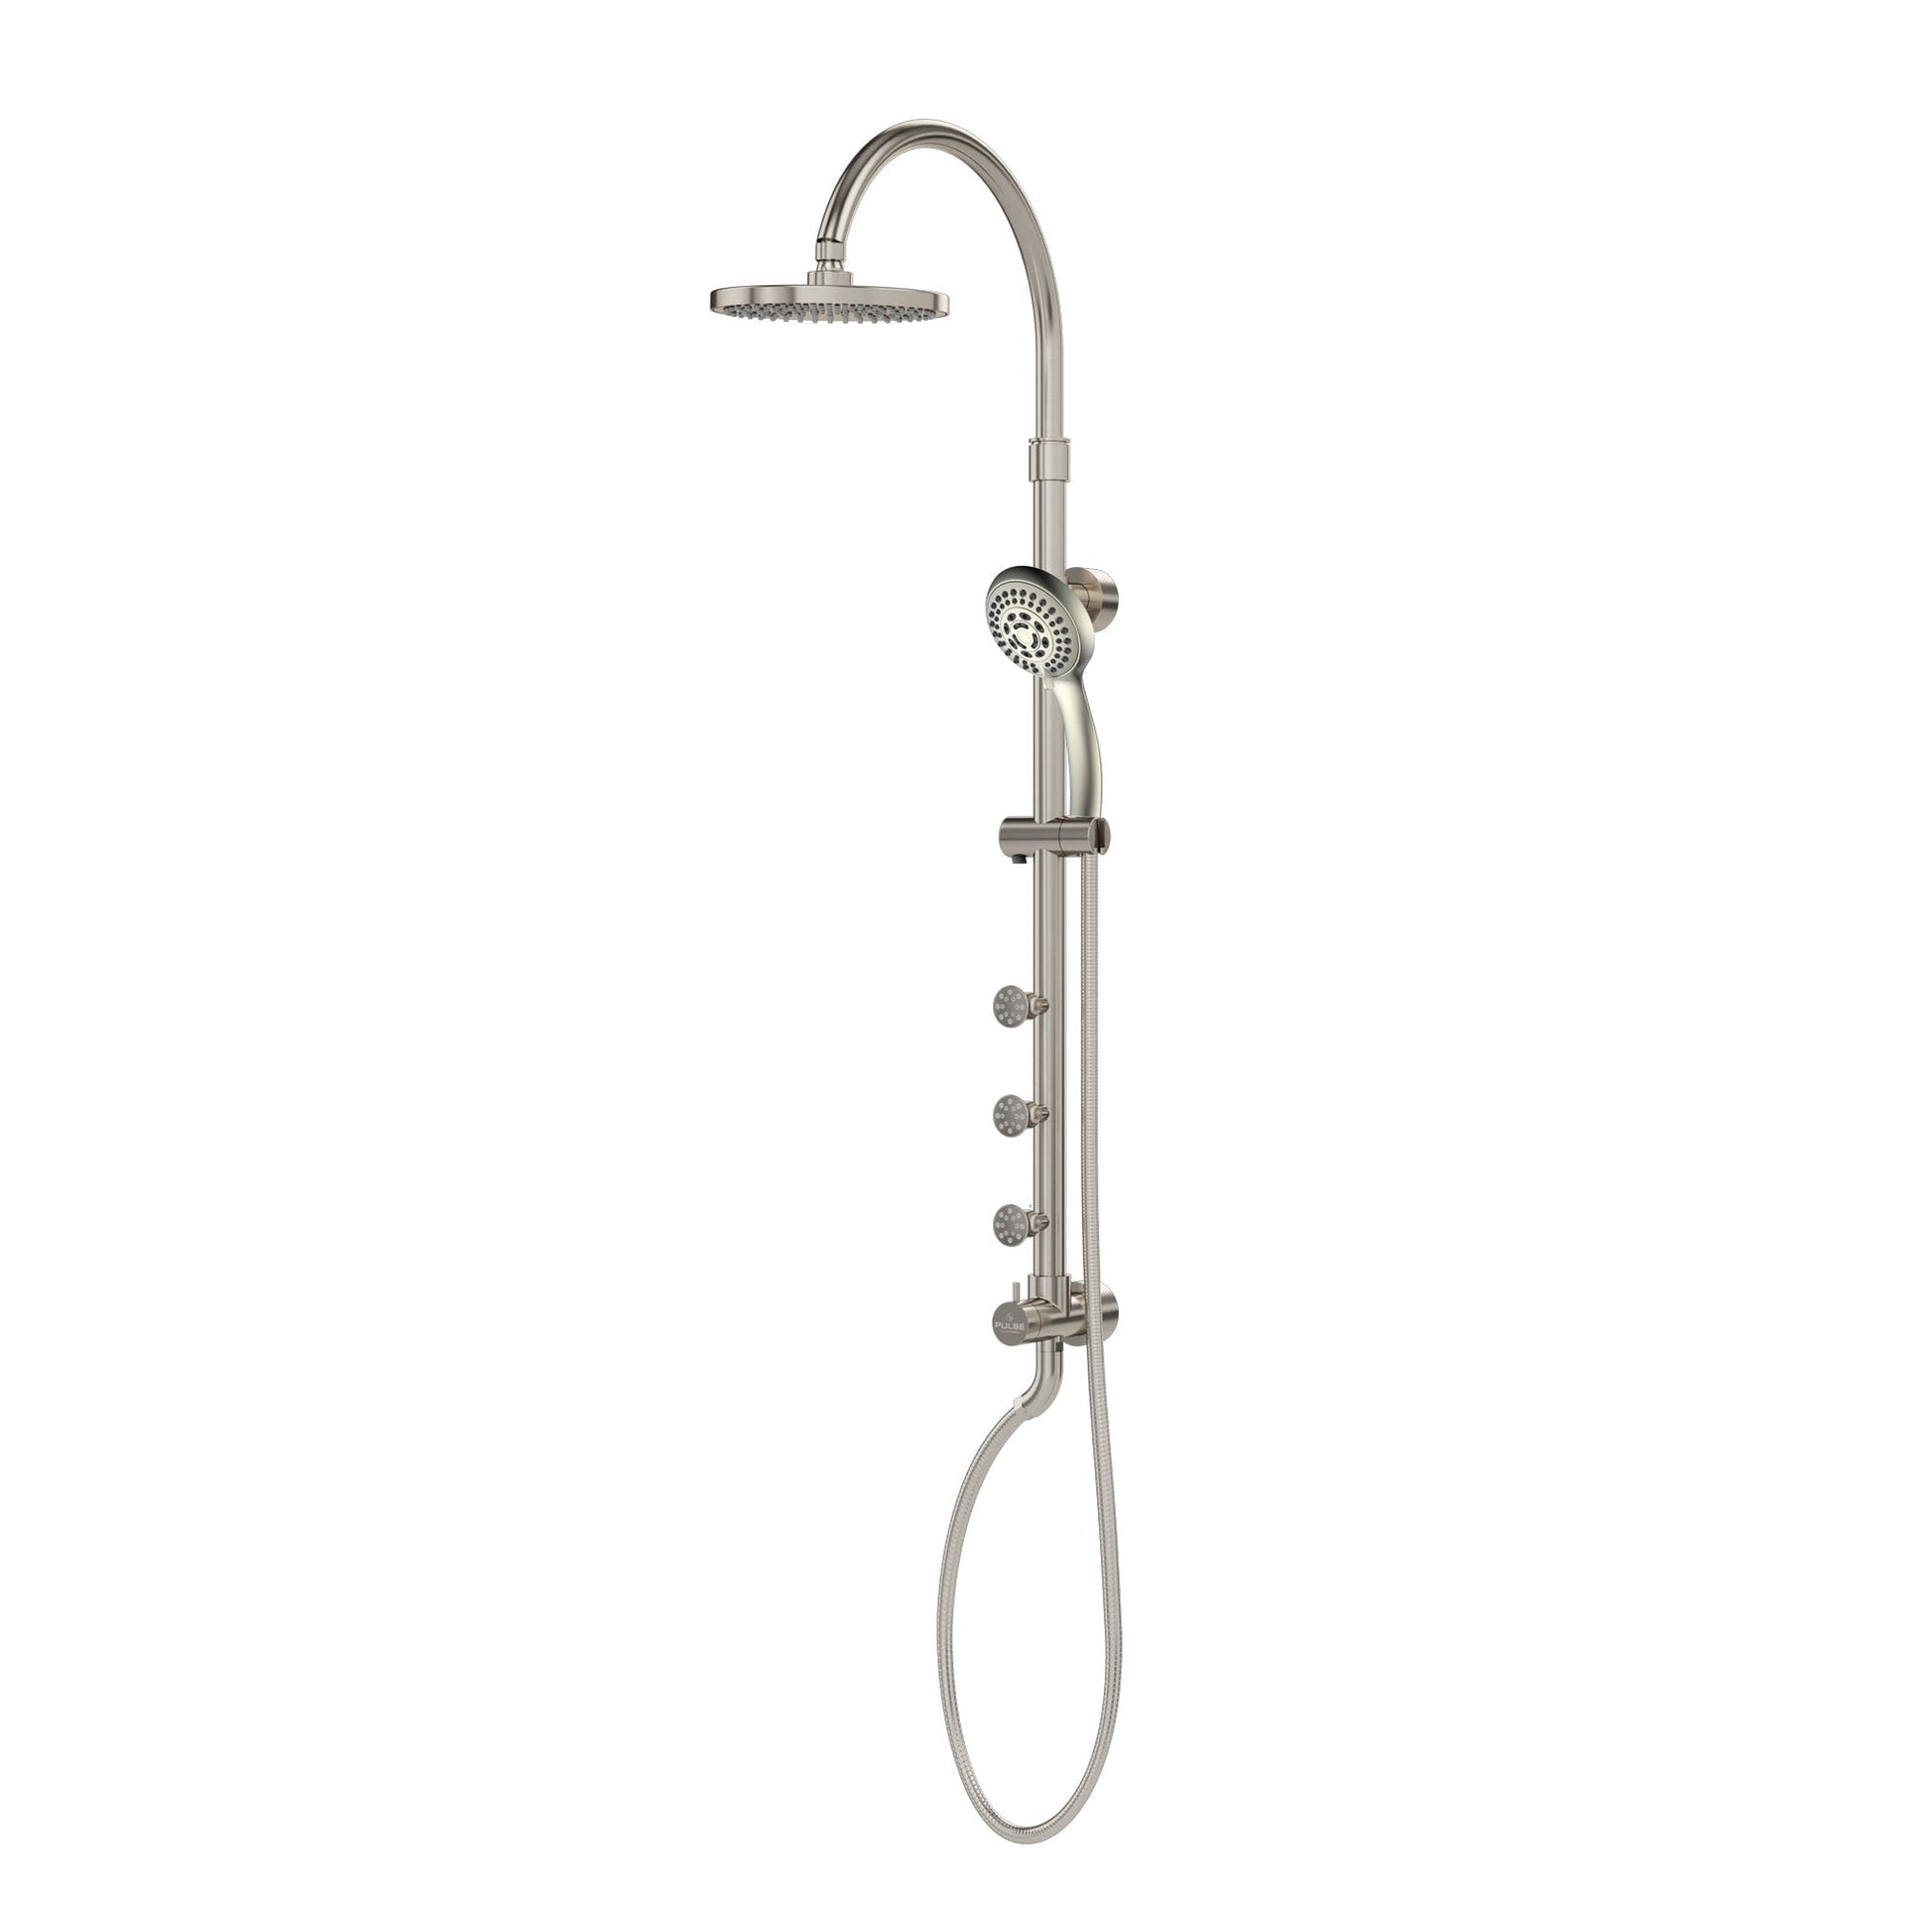 PULSE ShowerSpas Riviera Rain Shower System in Brushed Nickel Finish 2.5 GPM With 5-Function Hand Shower